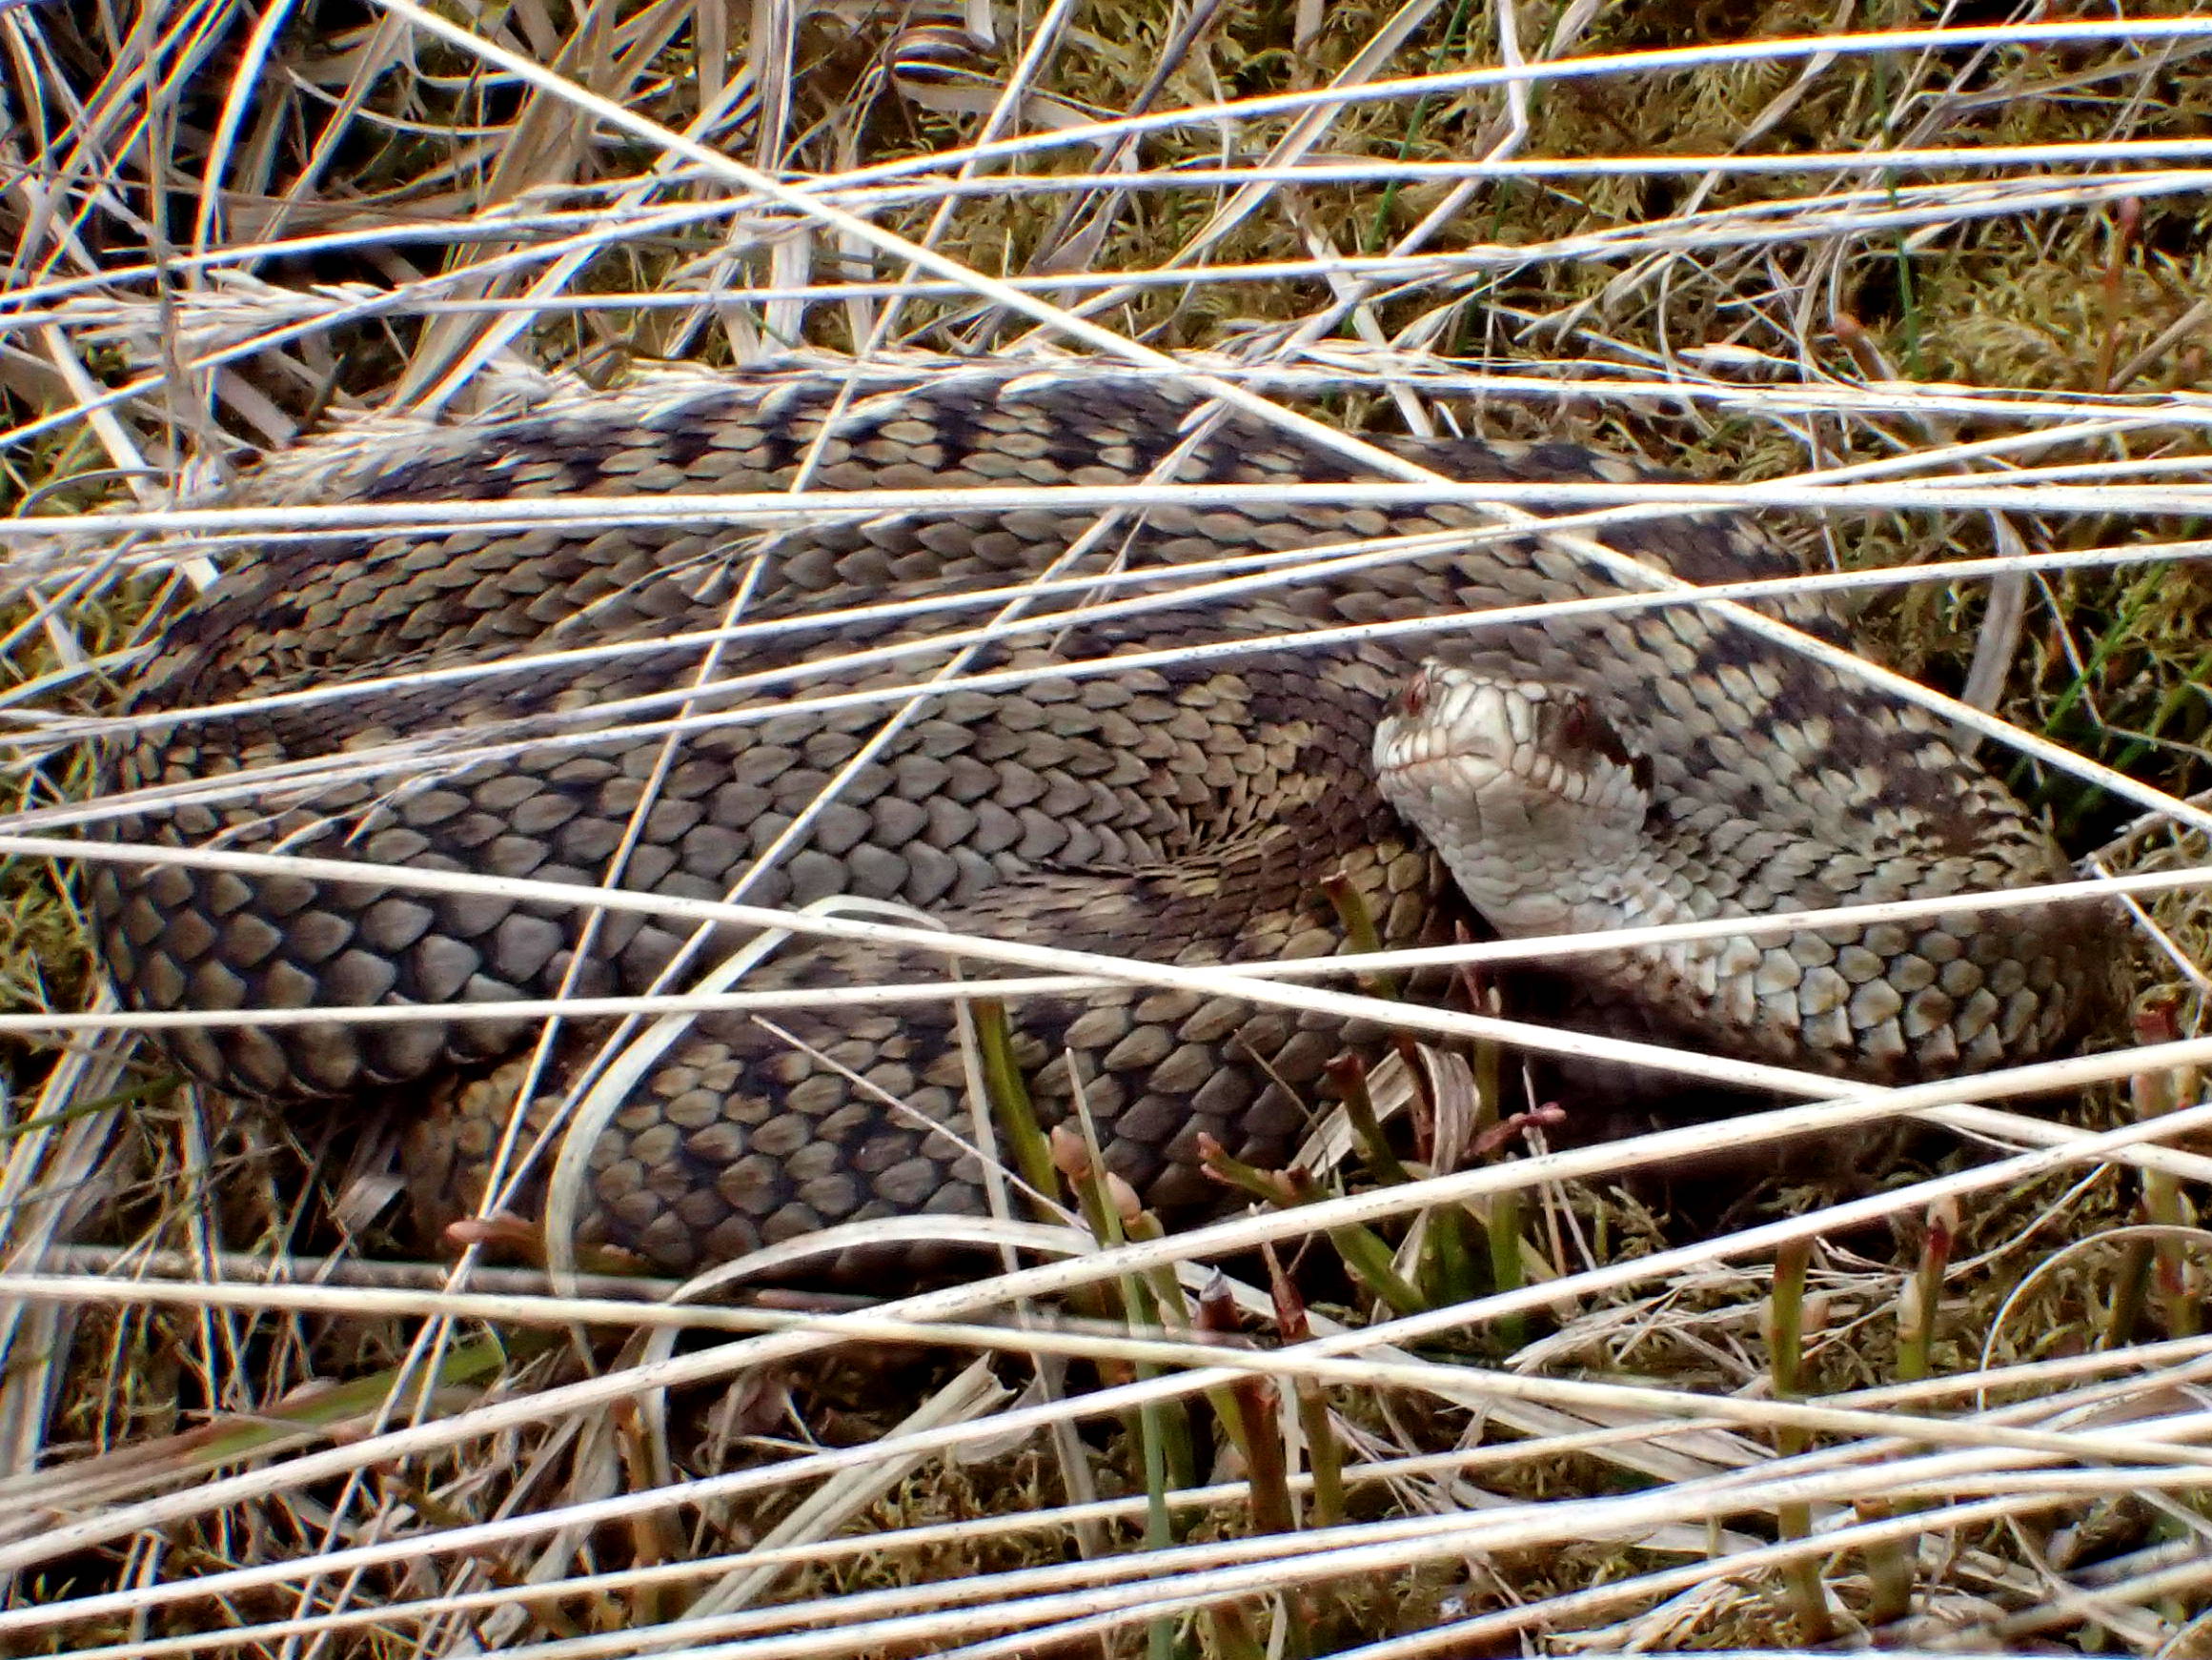 Reptile Survey and Mitigation Guidance for Peatland Habitats Published!